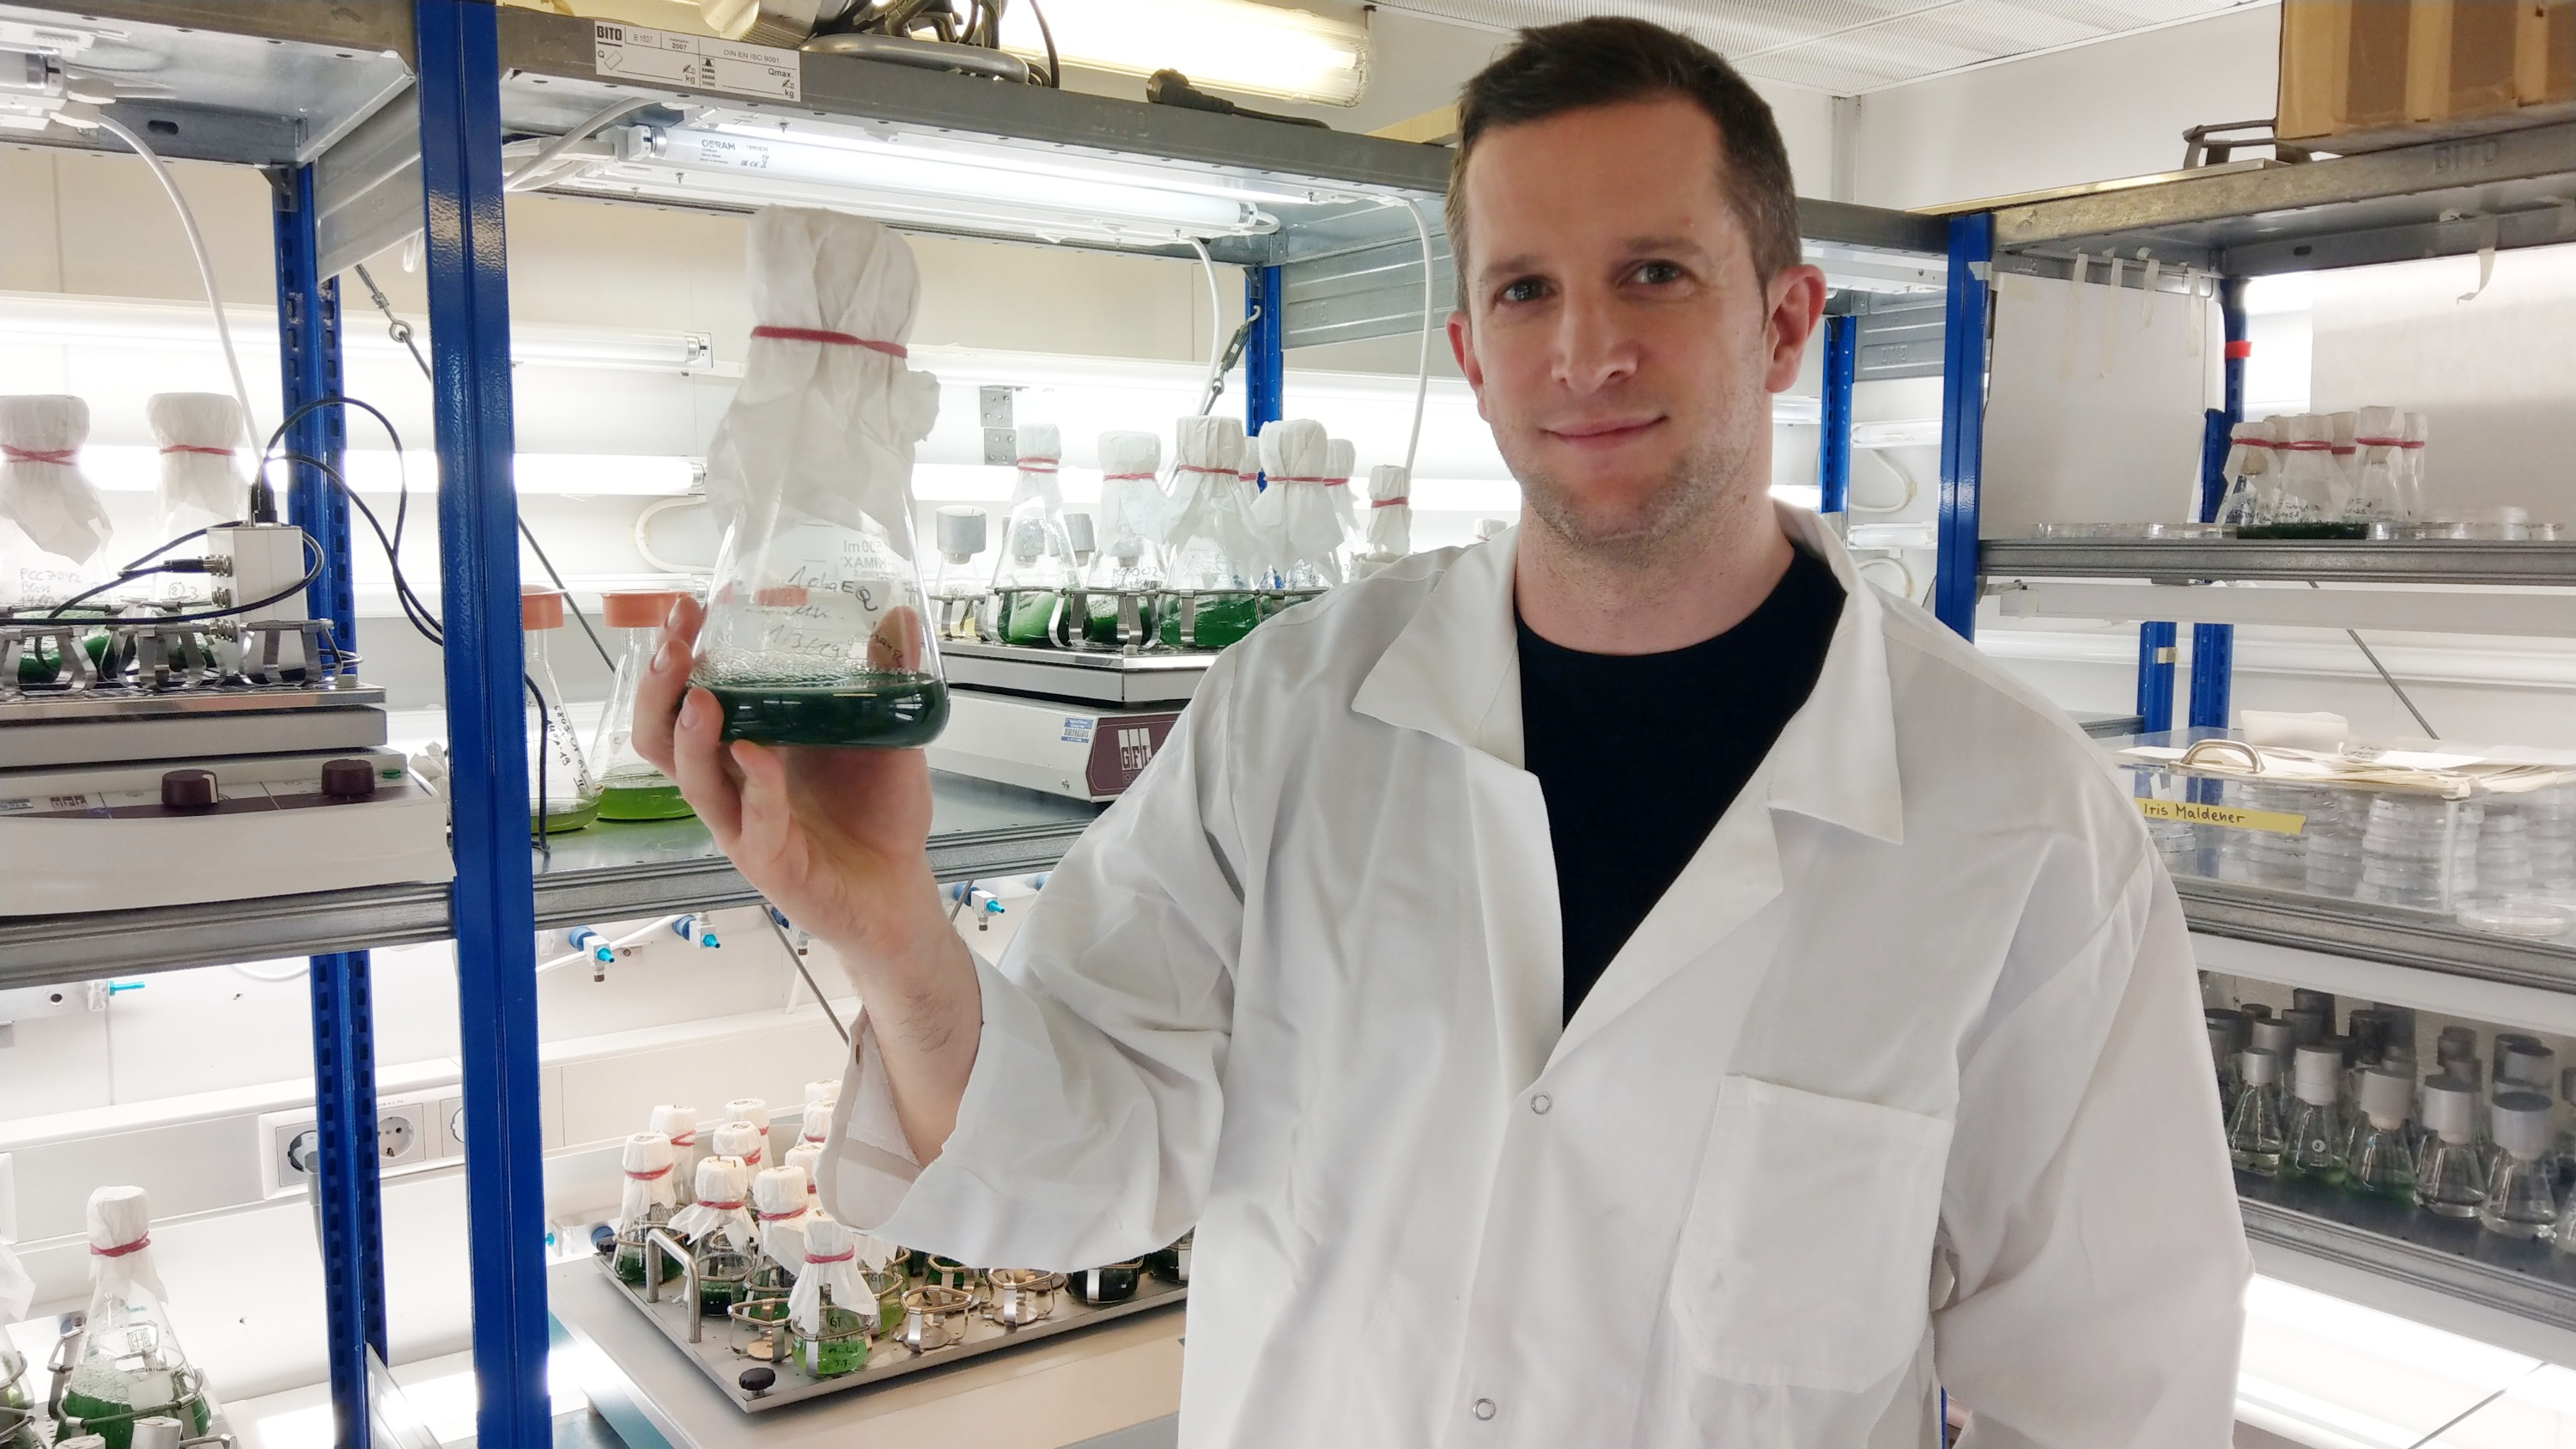 The photo shows the researcher in his laboratory holding an Erlenmeyer flask containing a green cyanobacteria culture